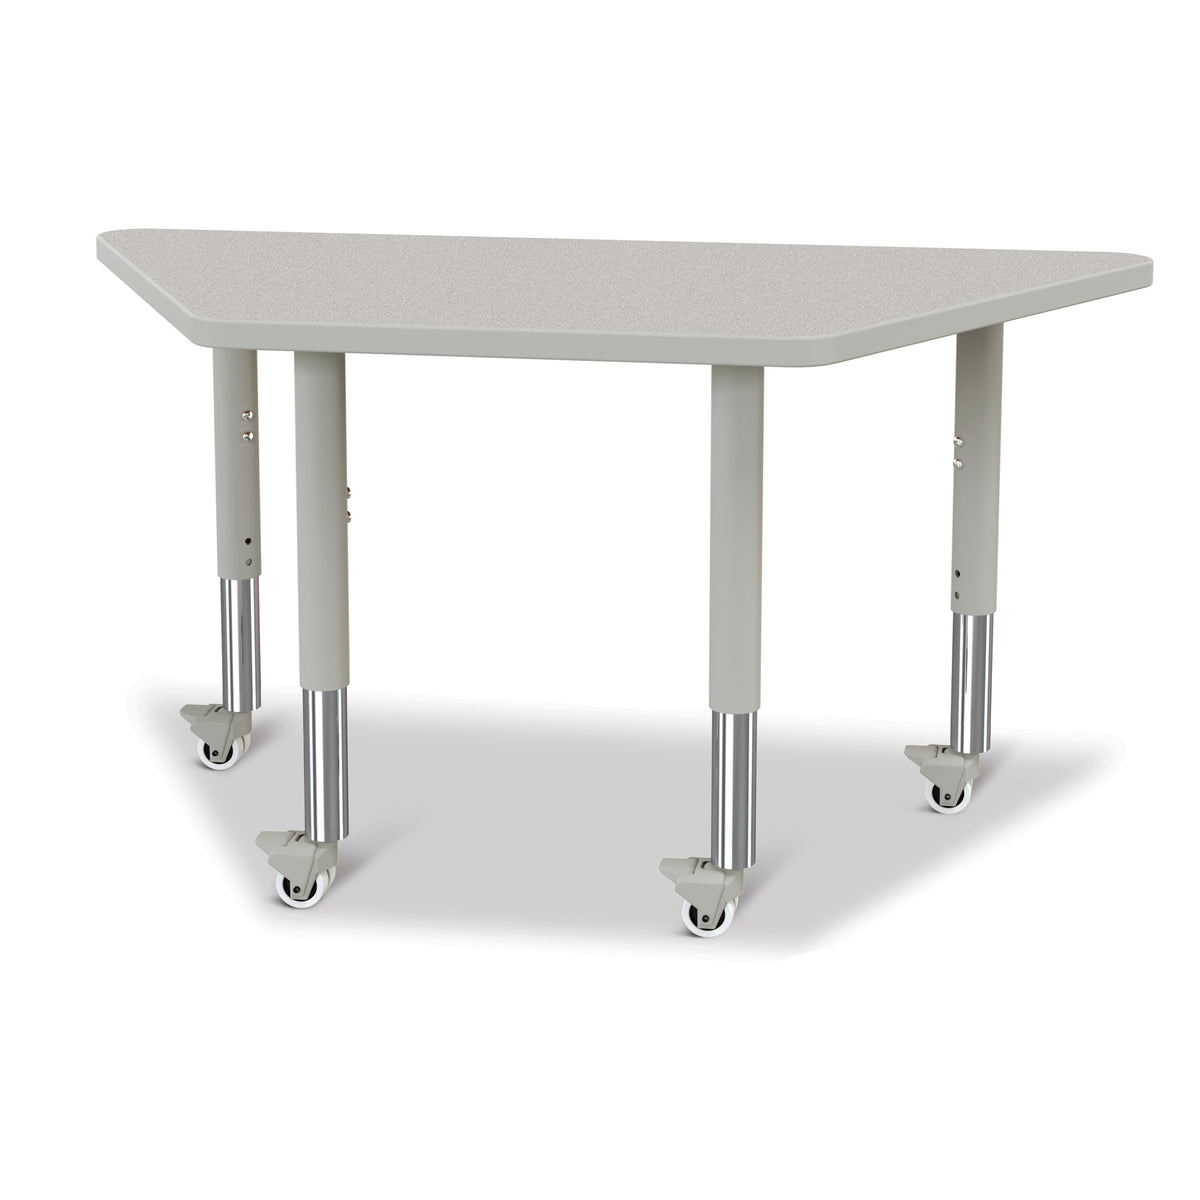 6438JCM000, Berries Trapezoid Activity Tables - 24" X 48", Mobile - Freckled Gray/Gray/Gray